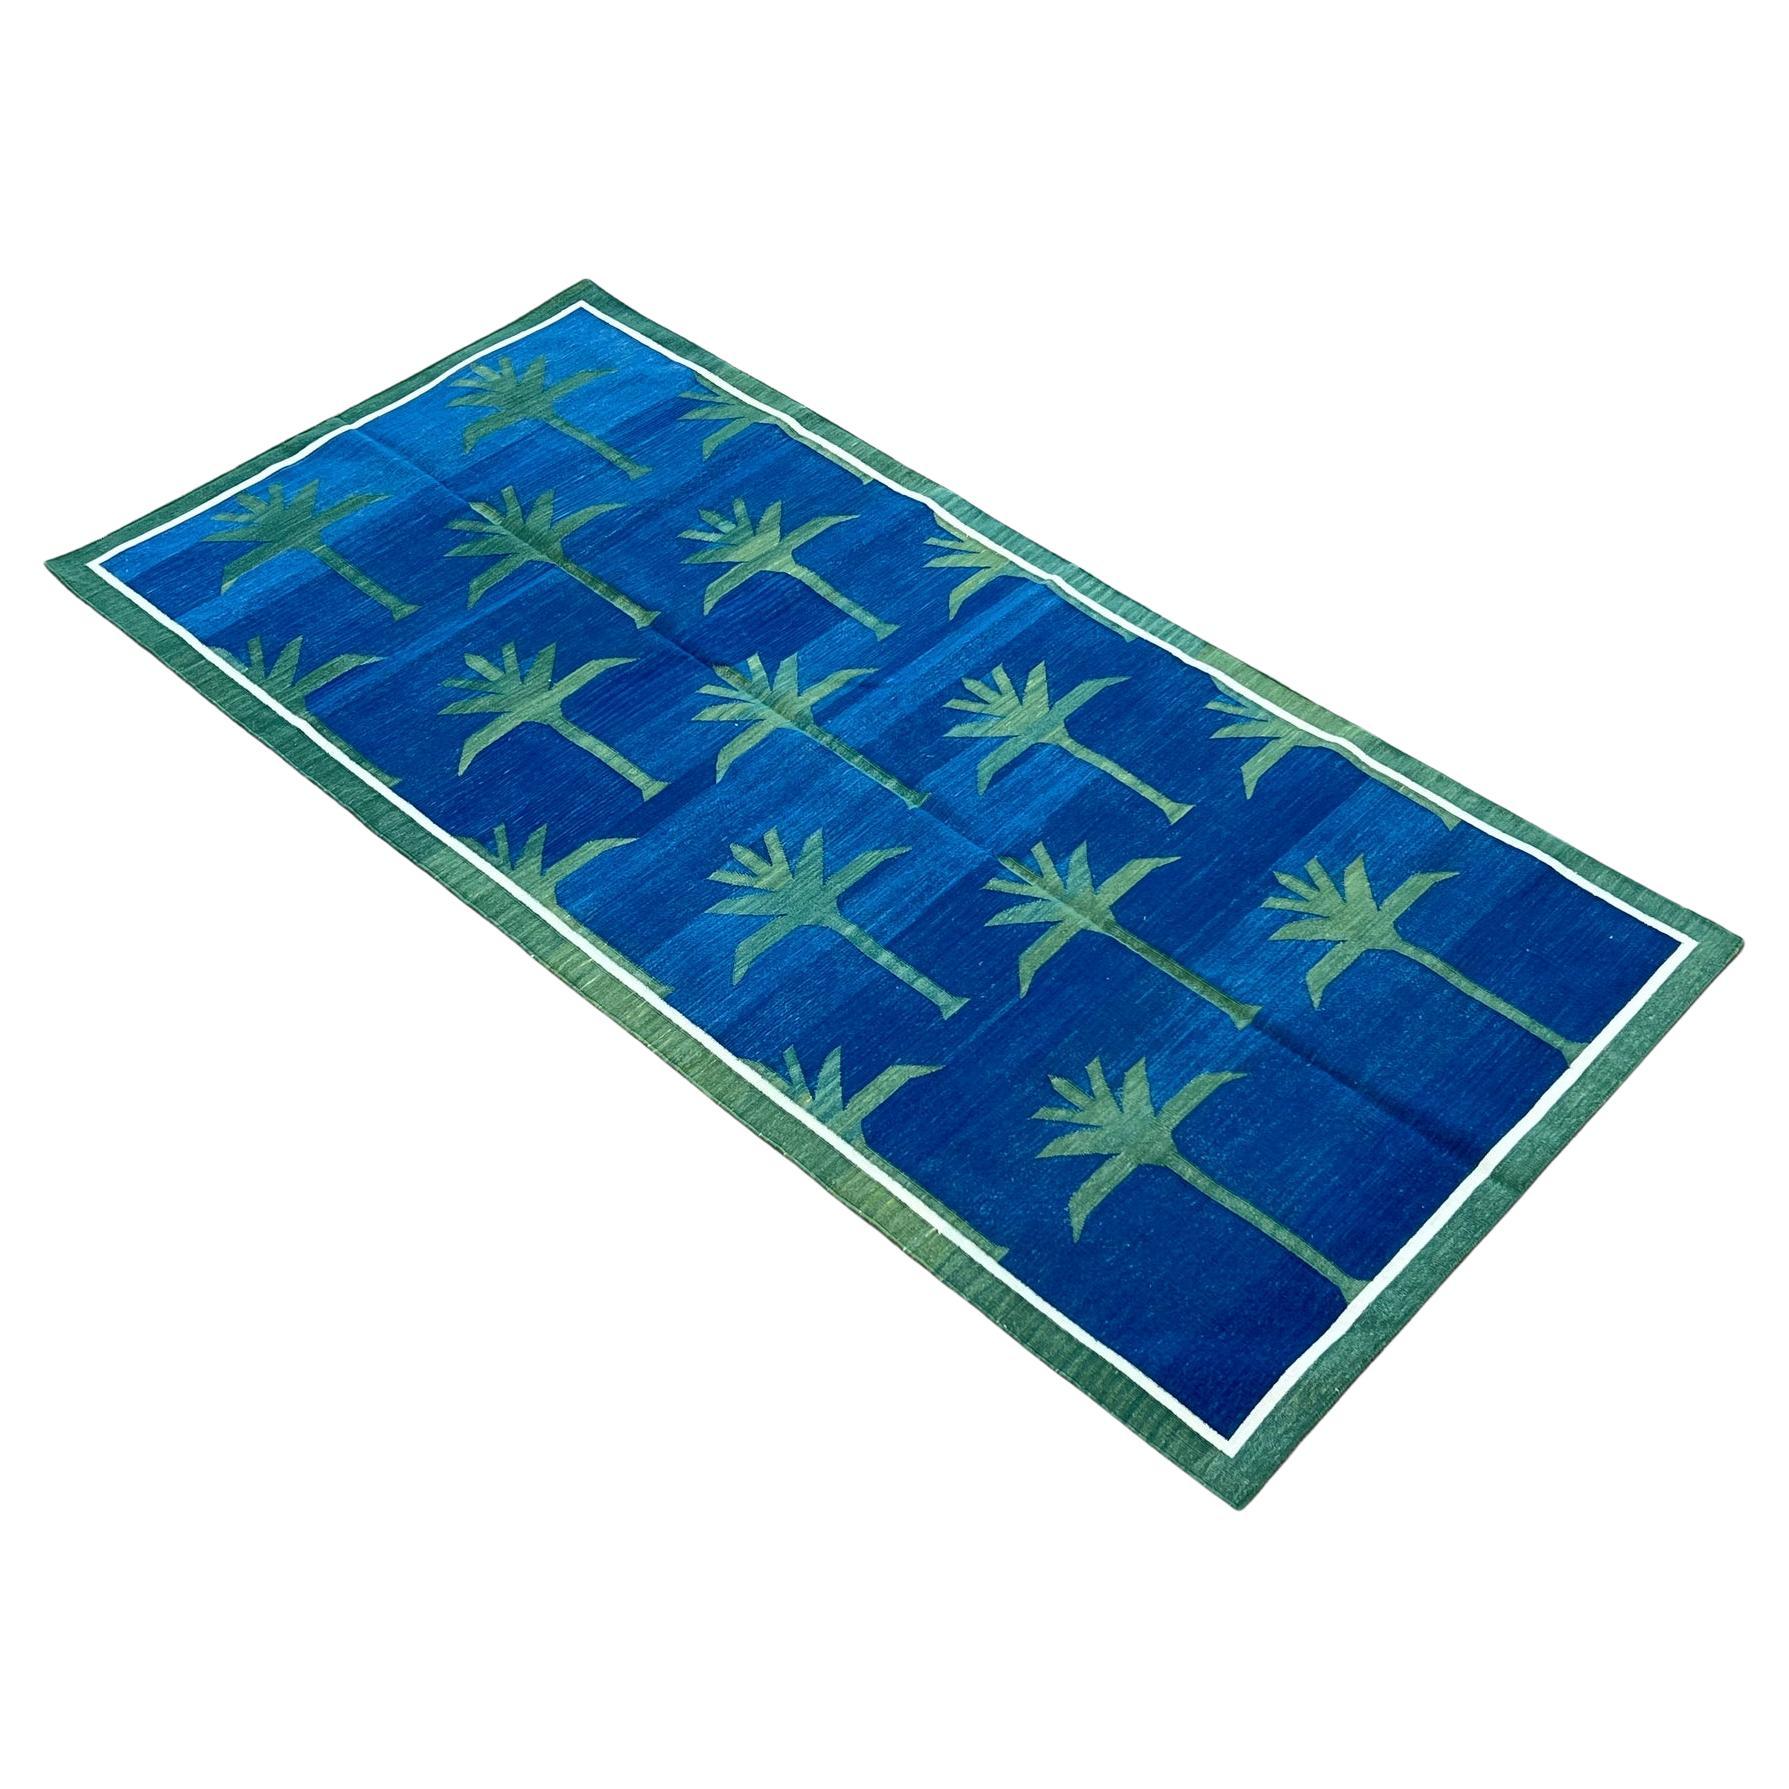 Handmade Cotton Area Flat Weave Rug, 4x8 Blue And Green Palm Tree Dhurrie Runner For Sale